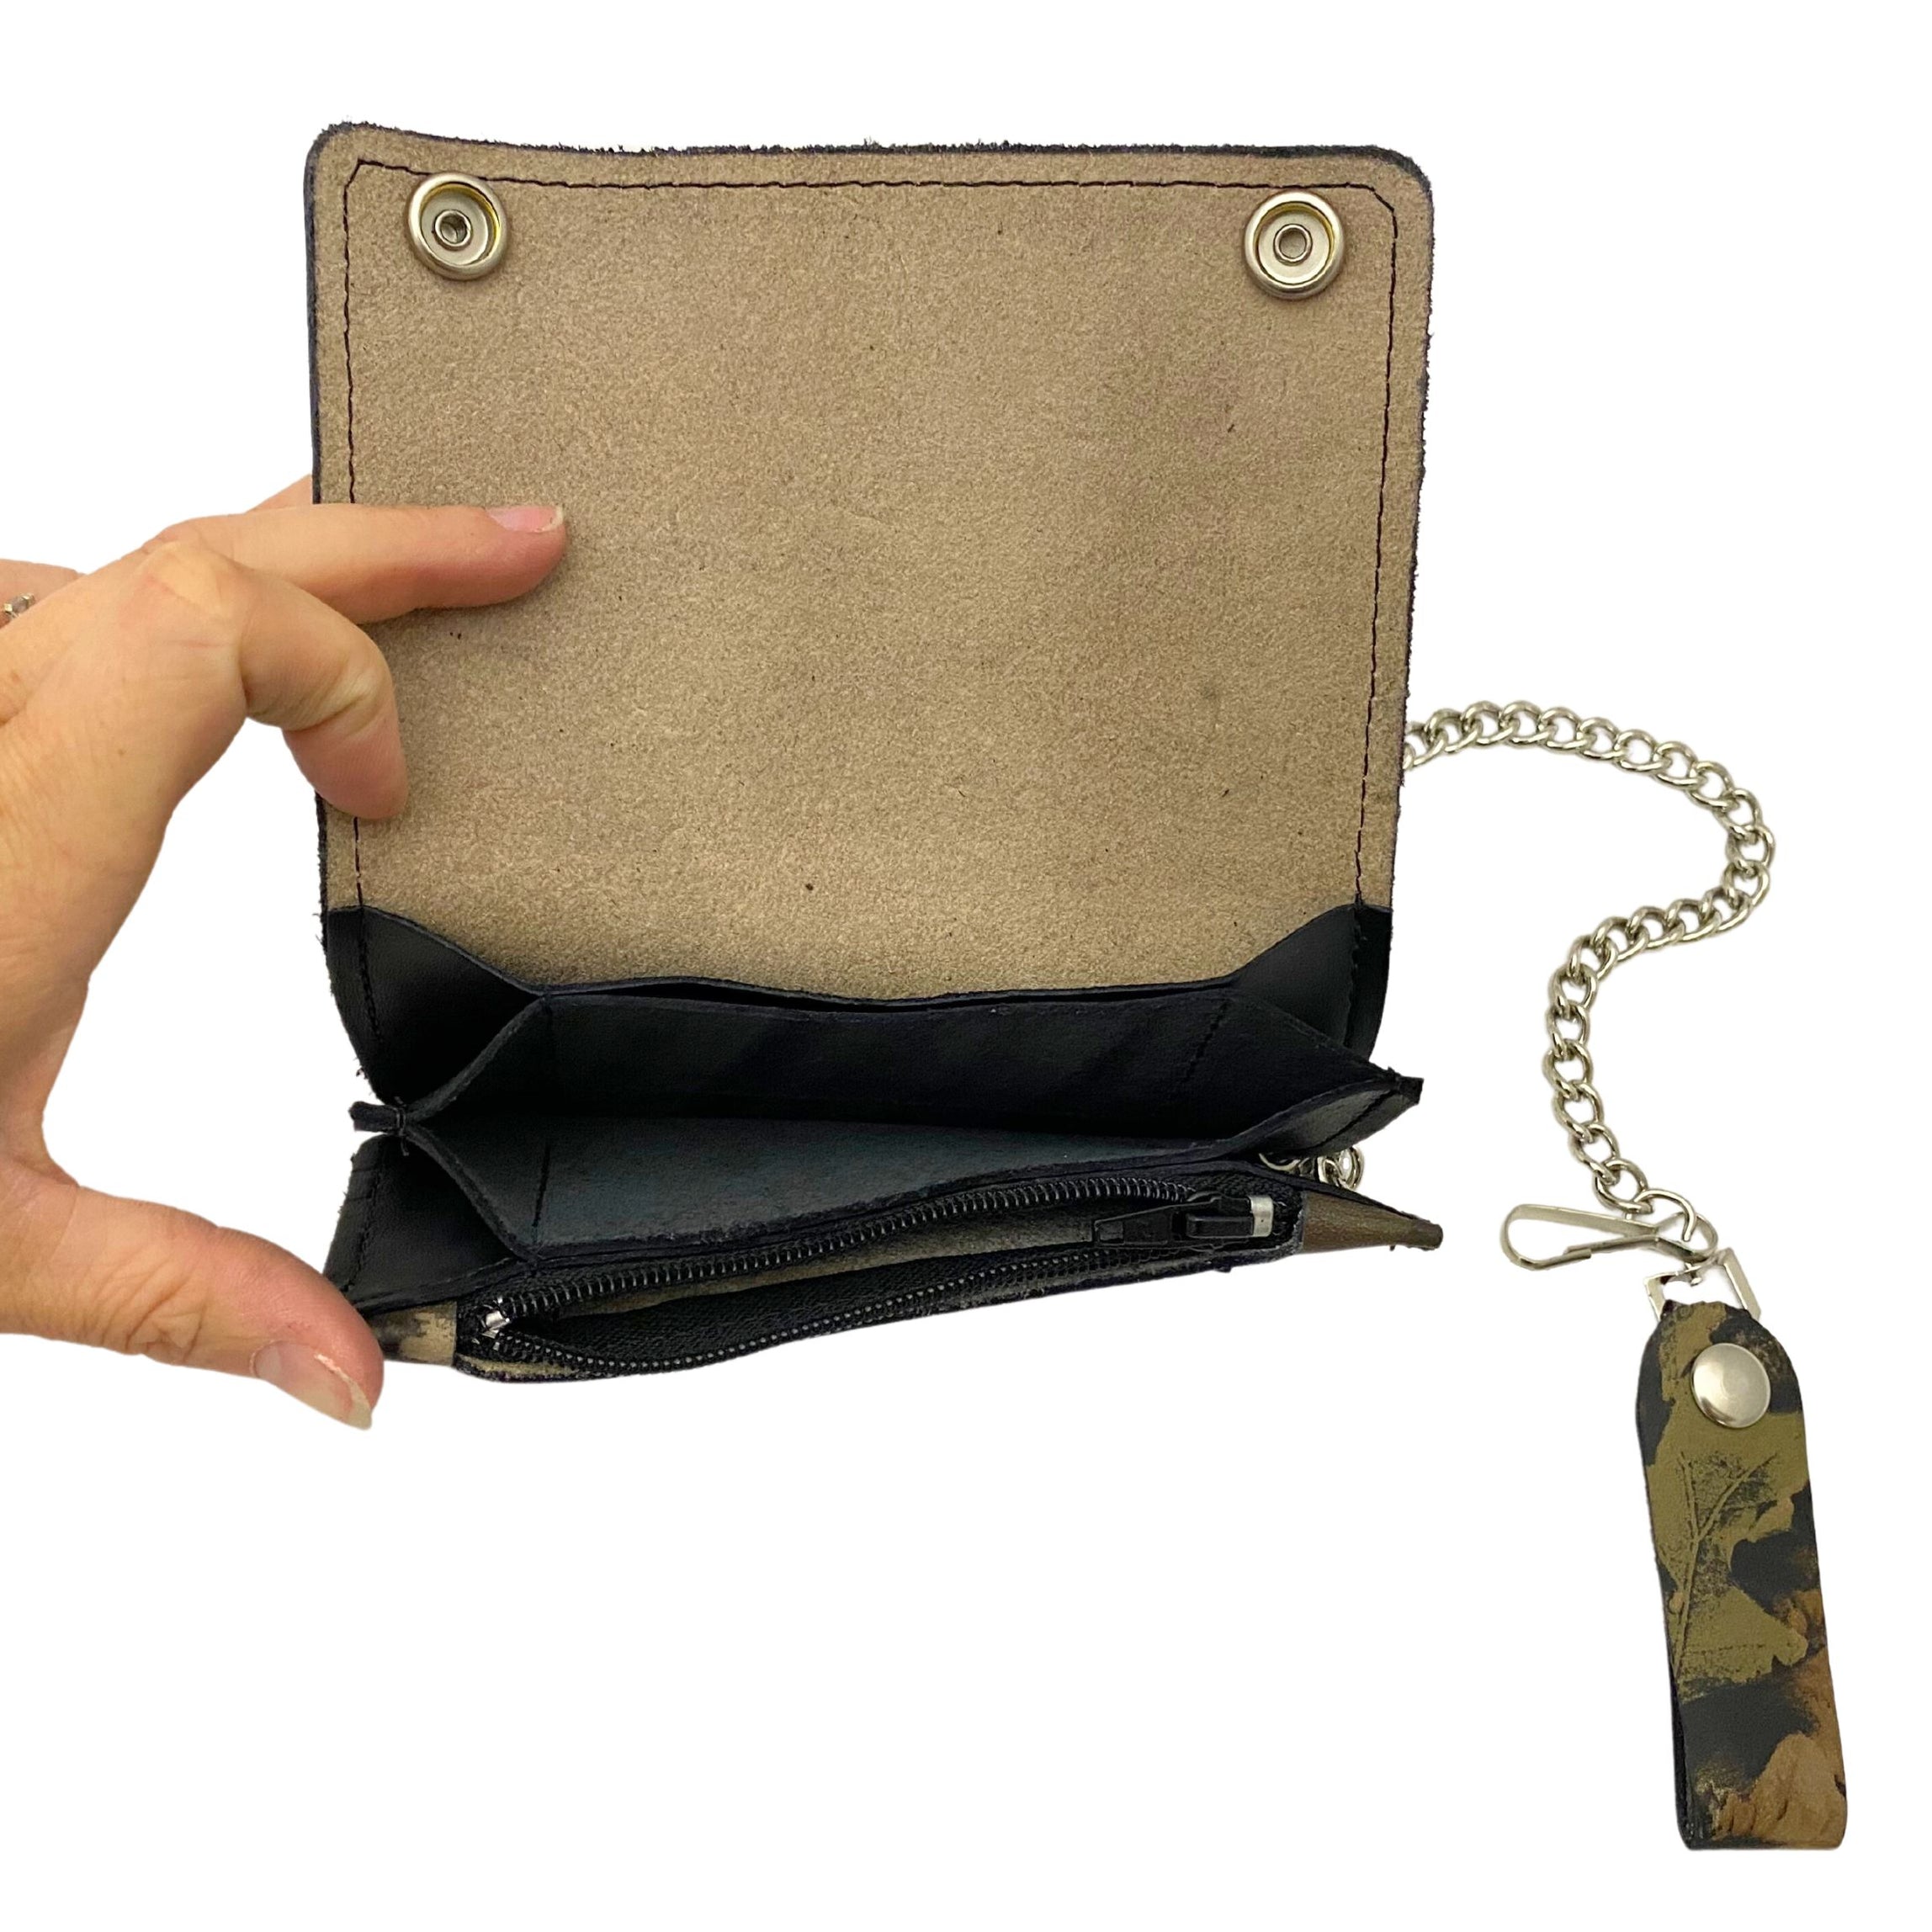 Camouflage Trucker Wallets with Chain - Trifold or Snap Closure ...